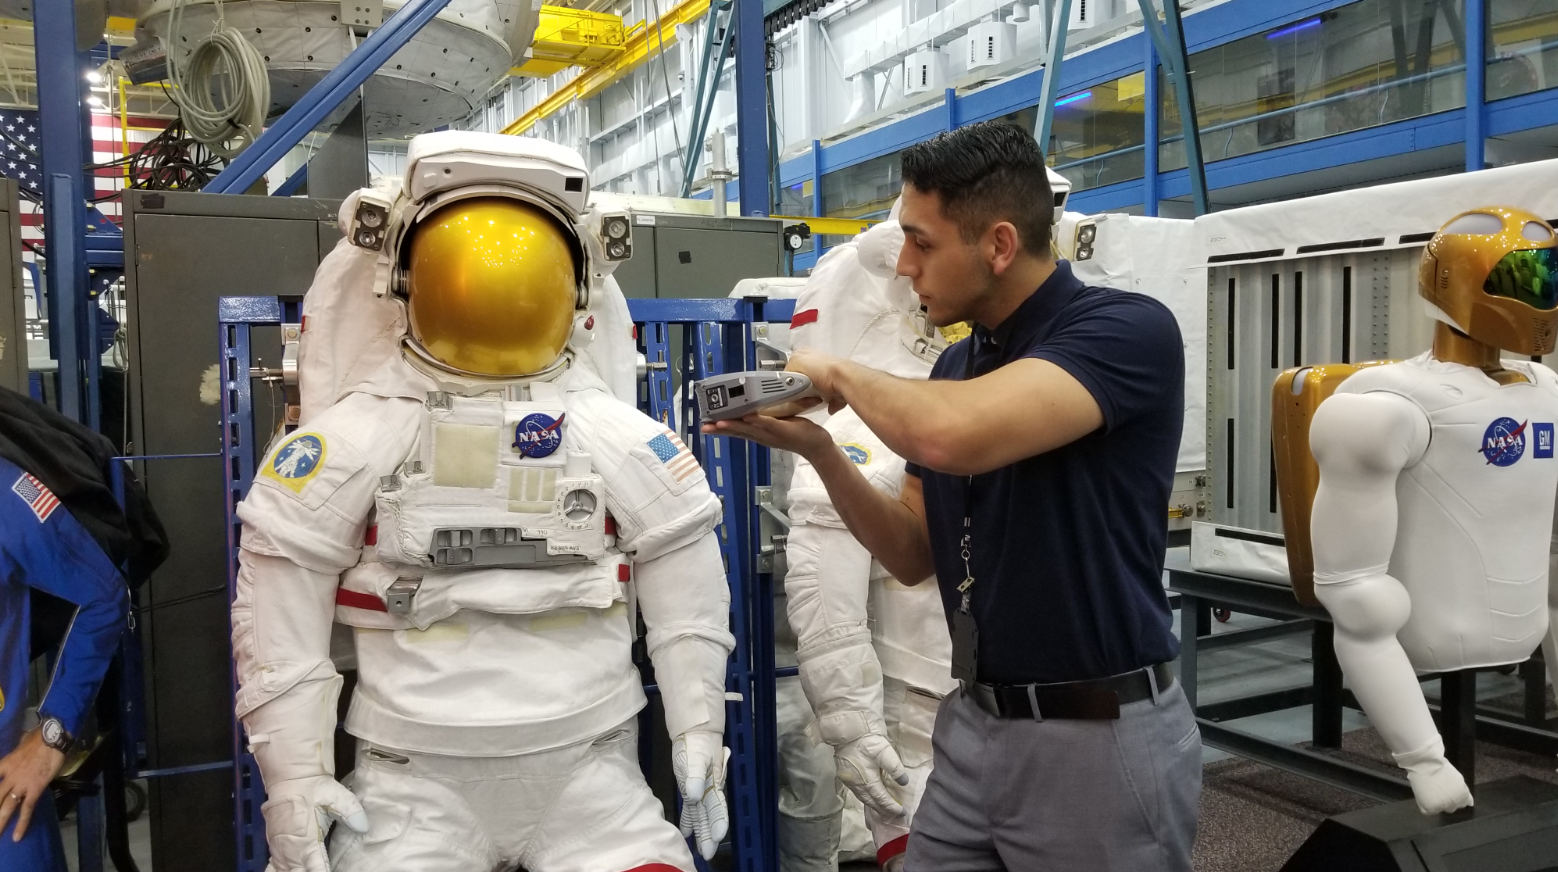 An intern working on a space suit